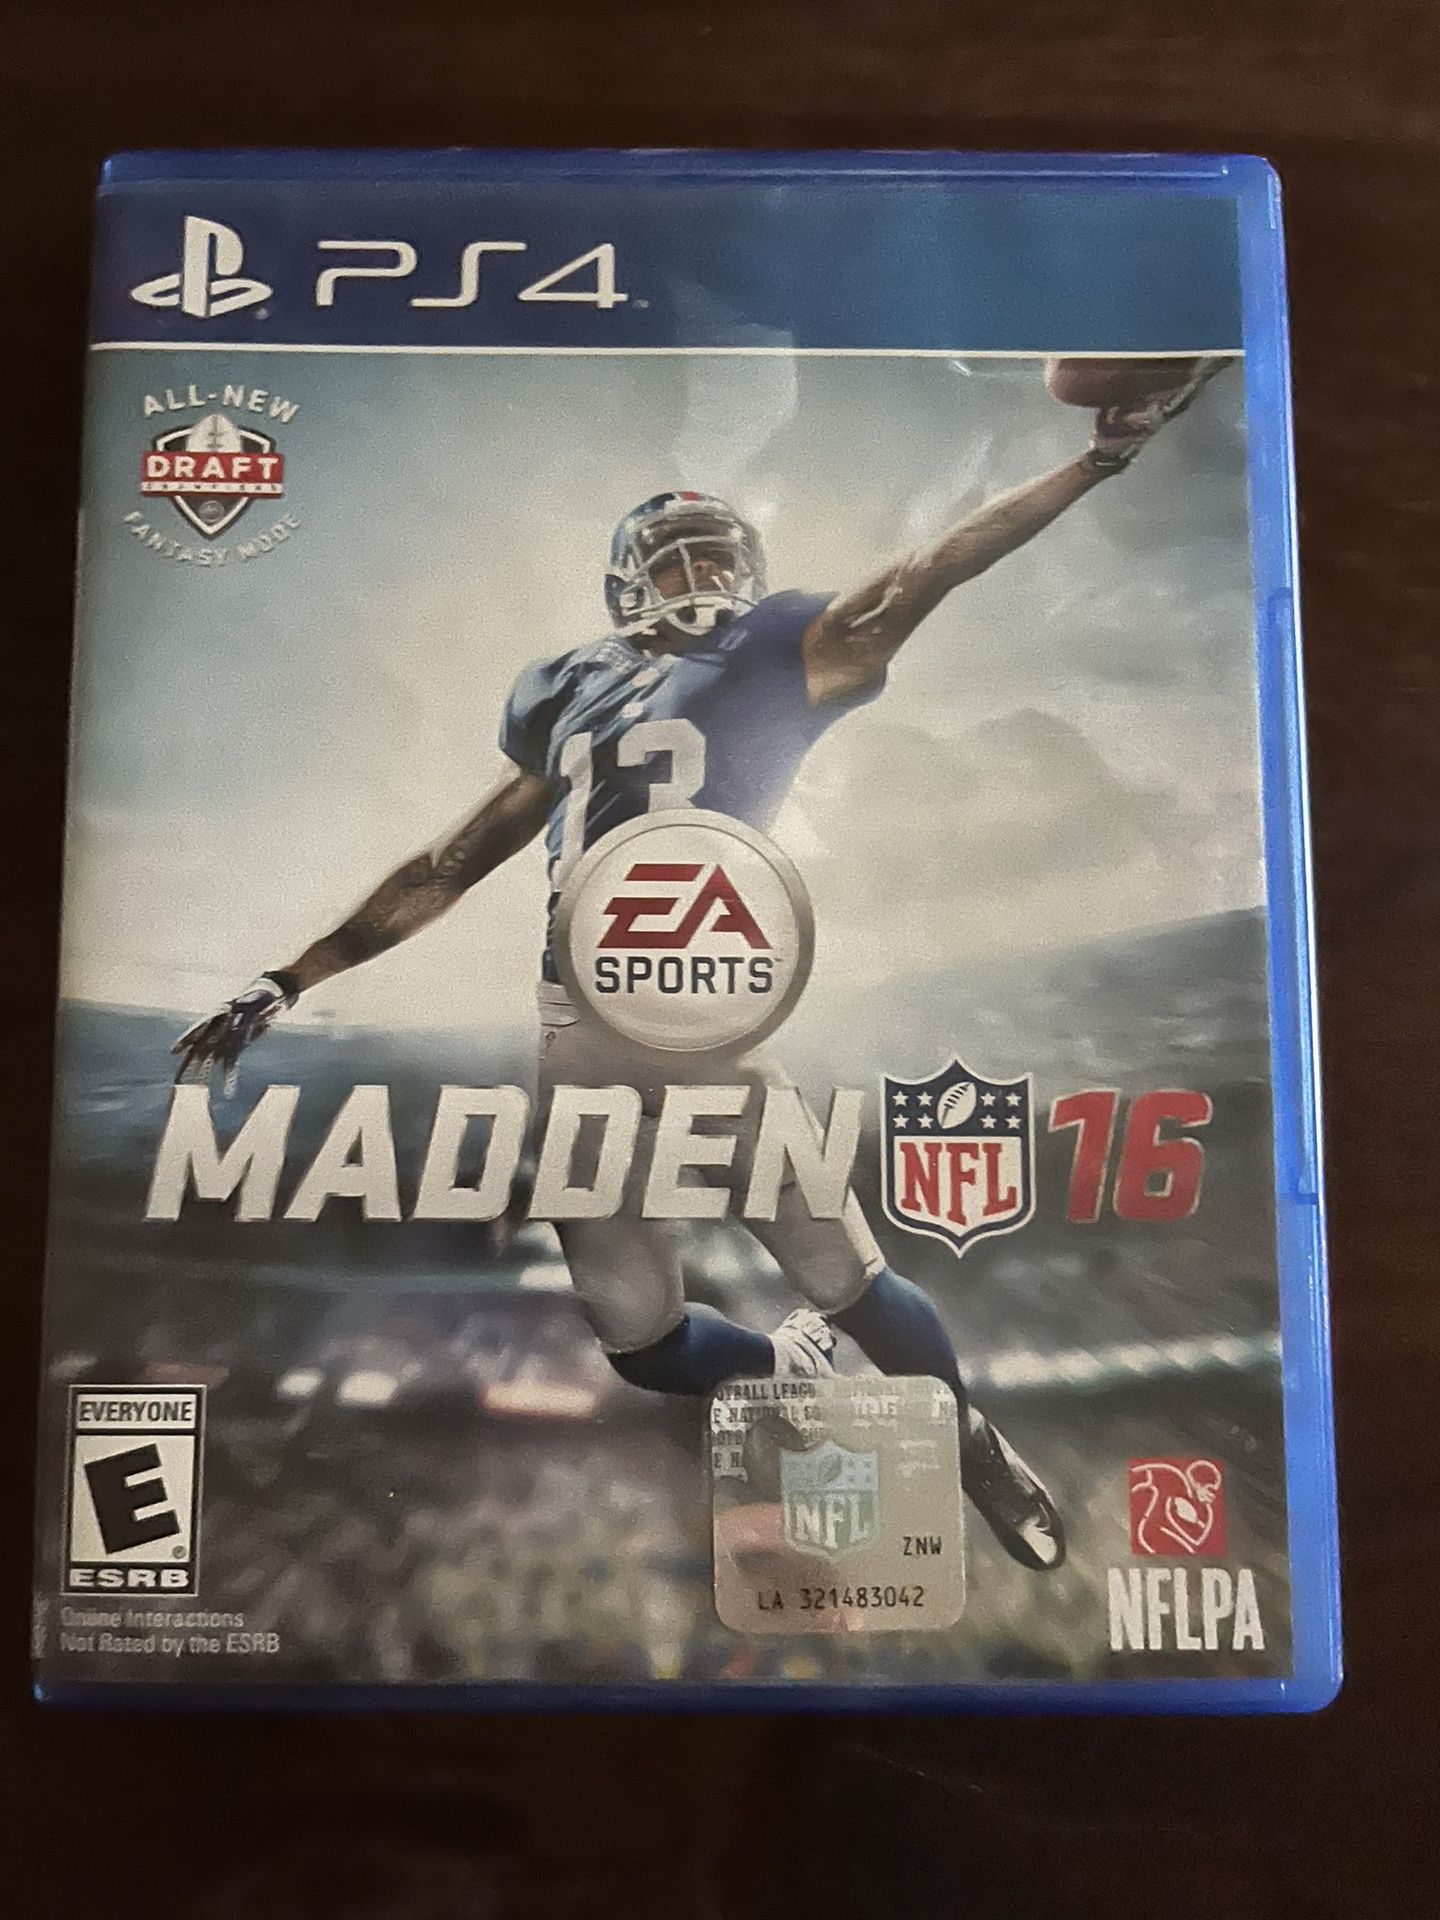 PS4 Madden NFL 16 Video Game 